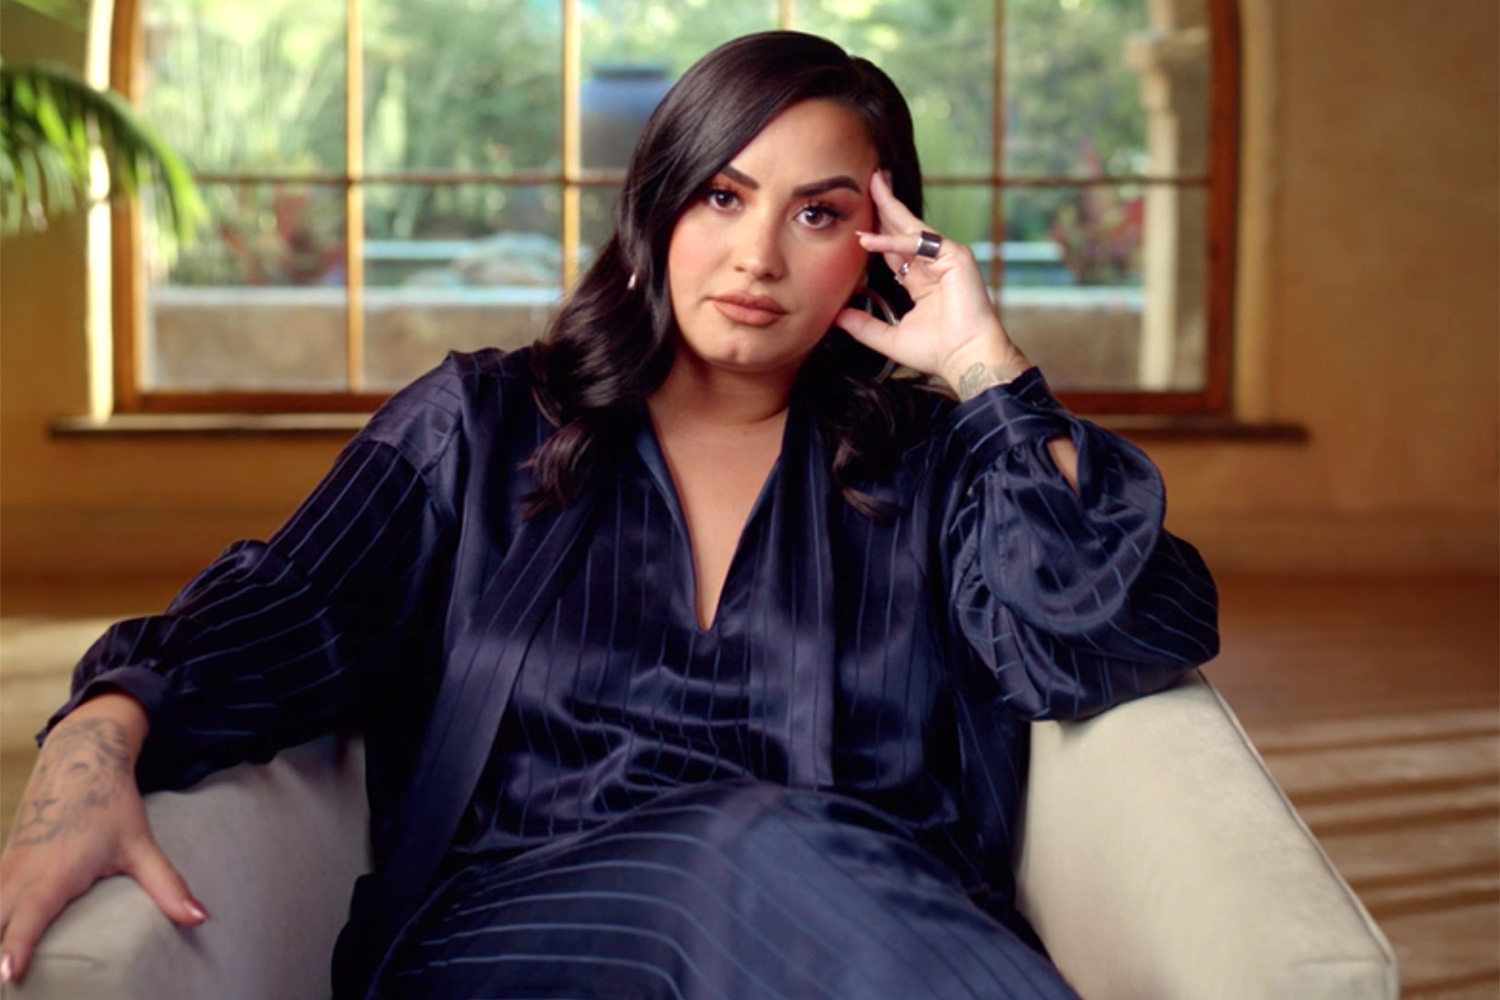 Demi Lovato Says She Has 'Brain Damage’ and ‘Blind Spots’ in Her Vision After Her Overdose:  https://www.youtube.com/watch?v=jTiiD8L811w